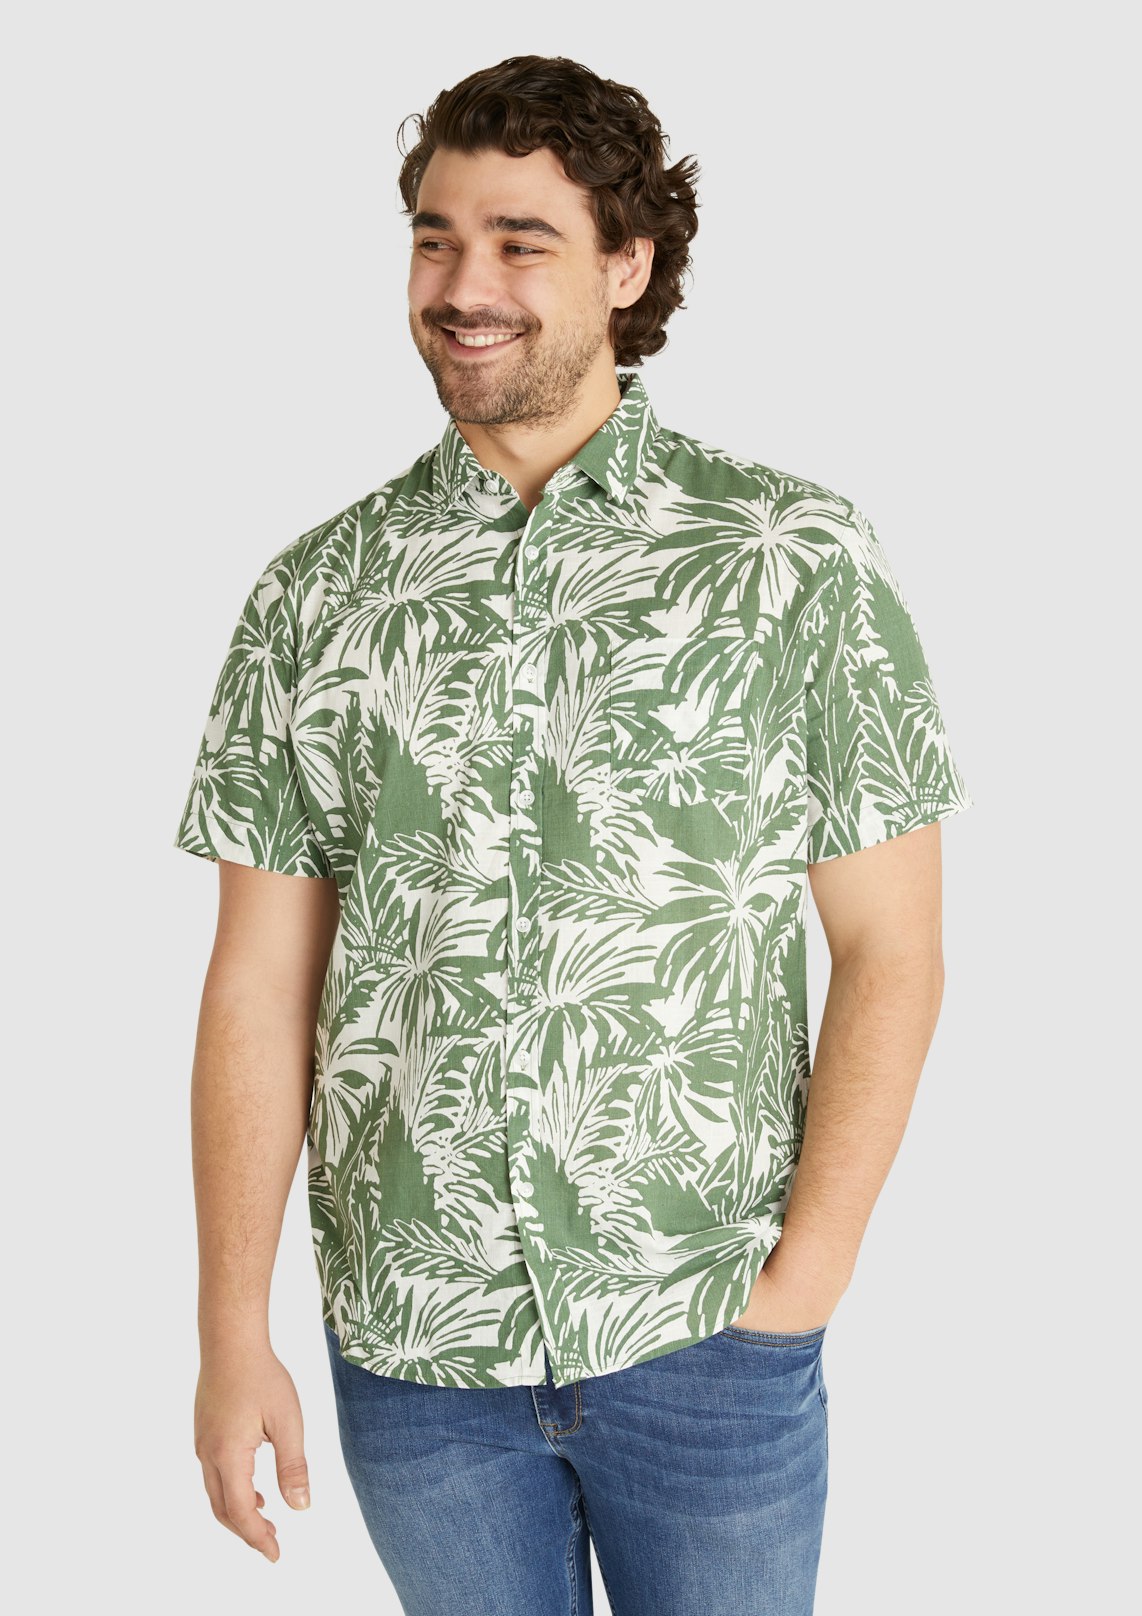 Johnny Bigg Loxton Classic Fit Leaf Print Short Sleeve Cotton Button-Up Shirt in Fern at Nordstrom, Size Large